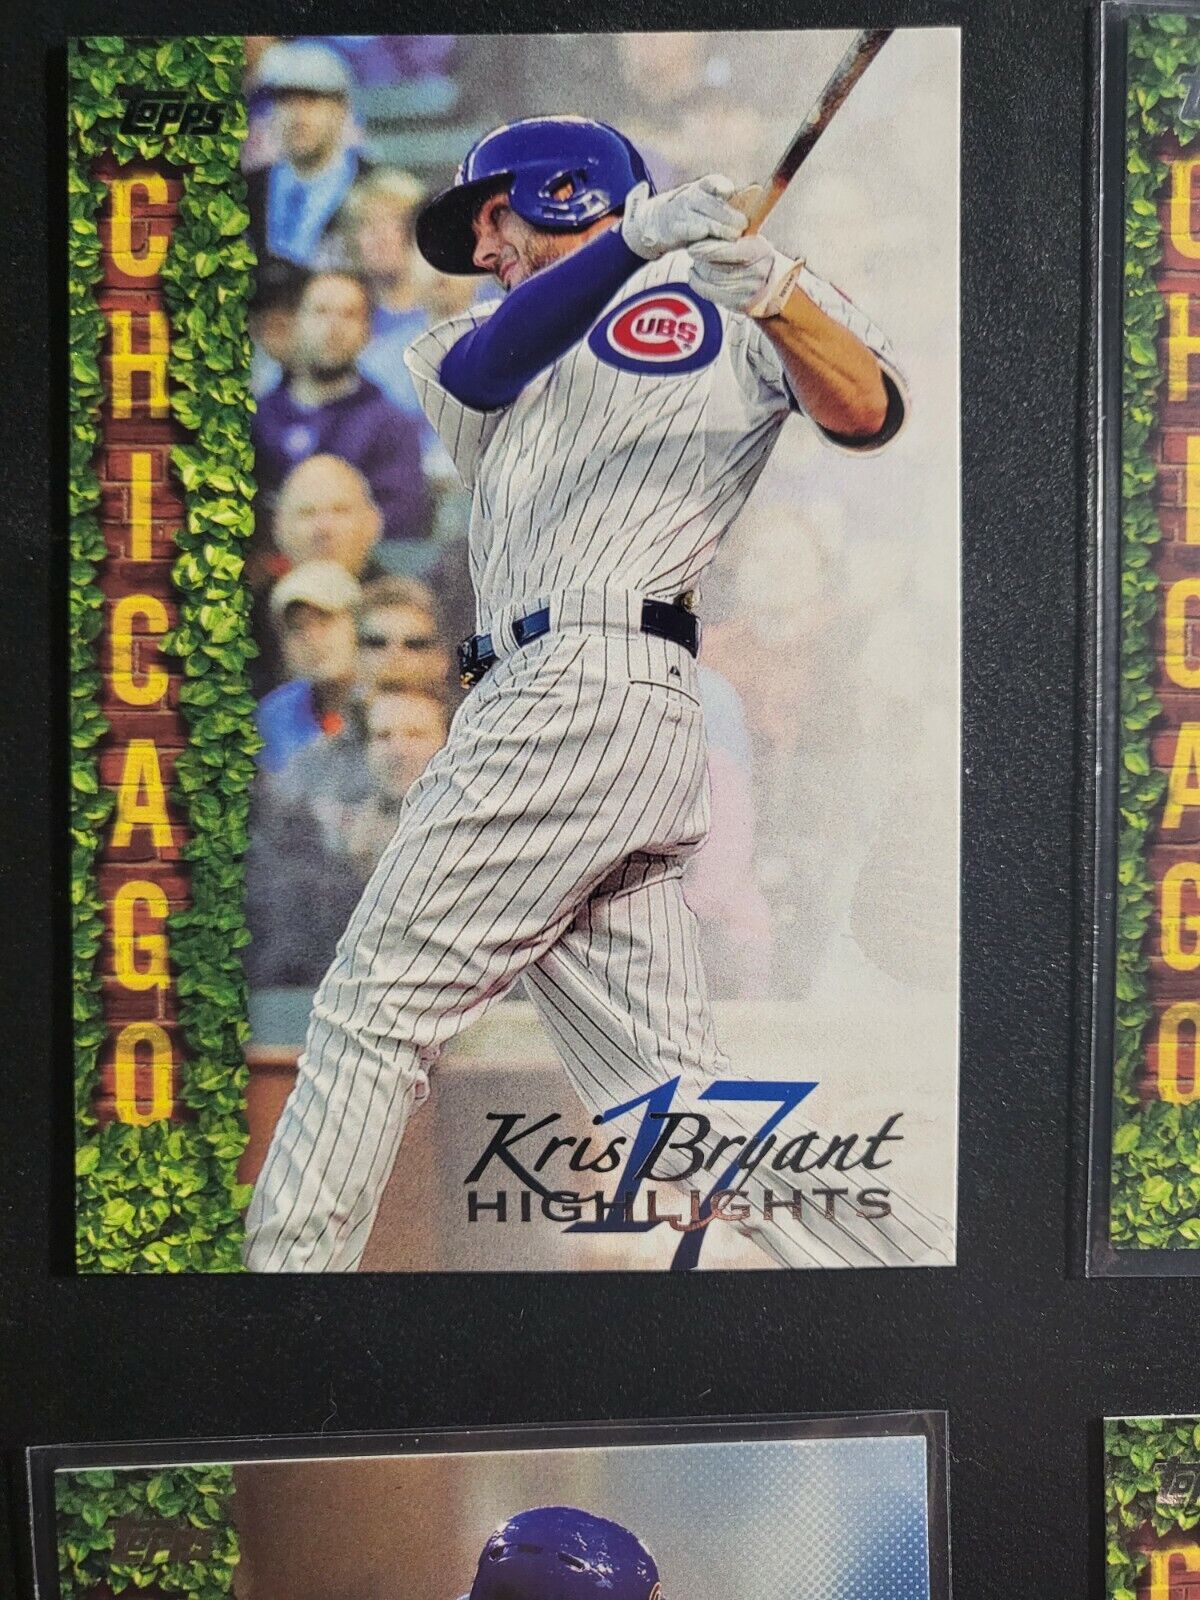 2018 Topps Series 1 Kris Bryant Highlights Inserts. Complete your set. You pick.